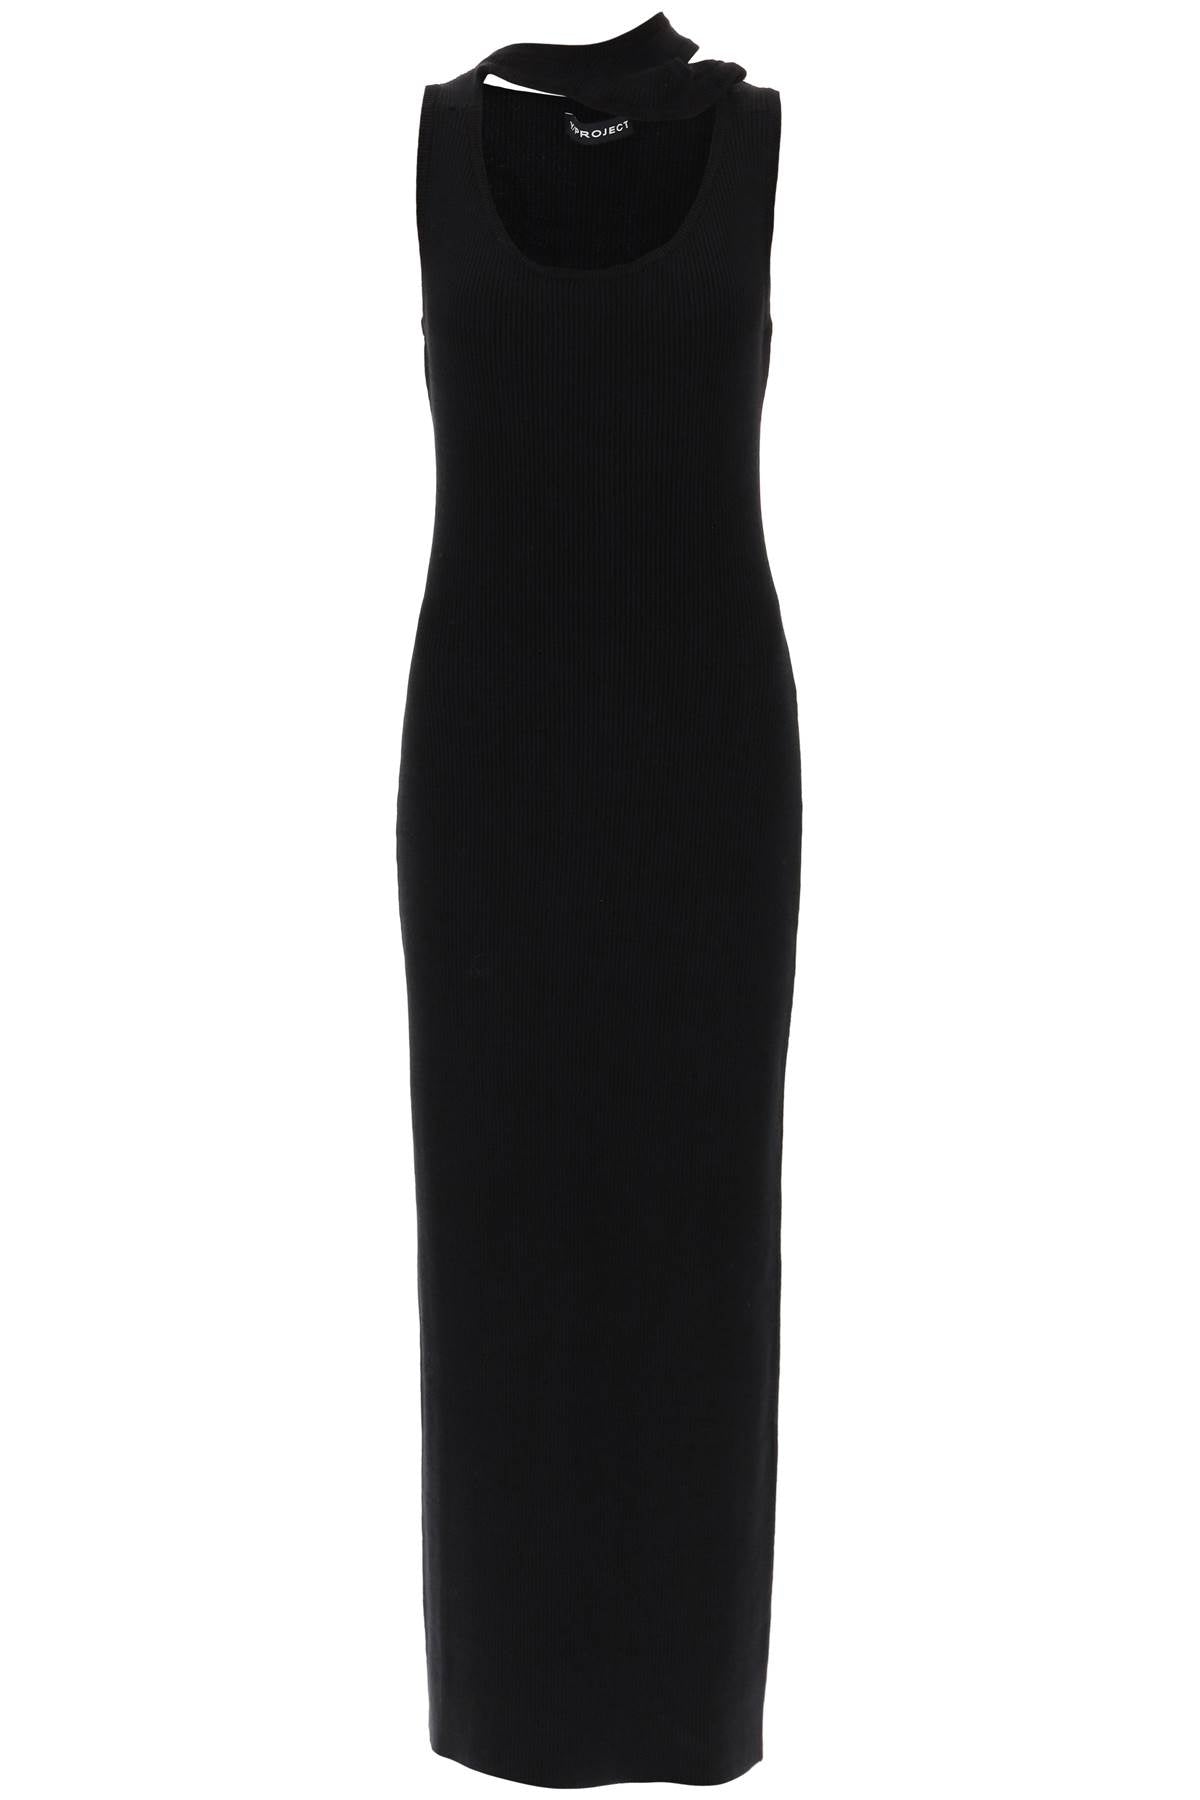 Y/PROJECT Sleek and Sophisticated Maxi Dress in Black for Women